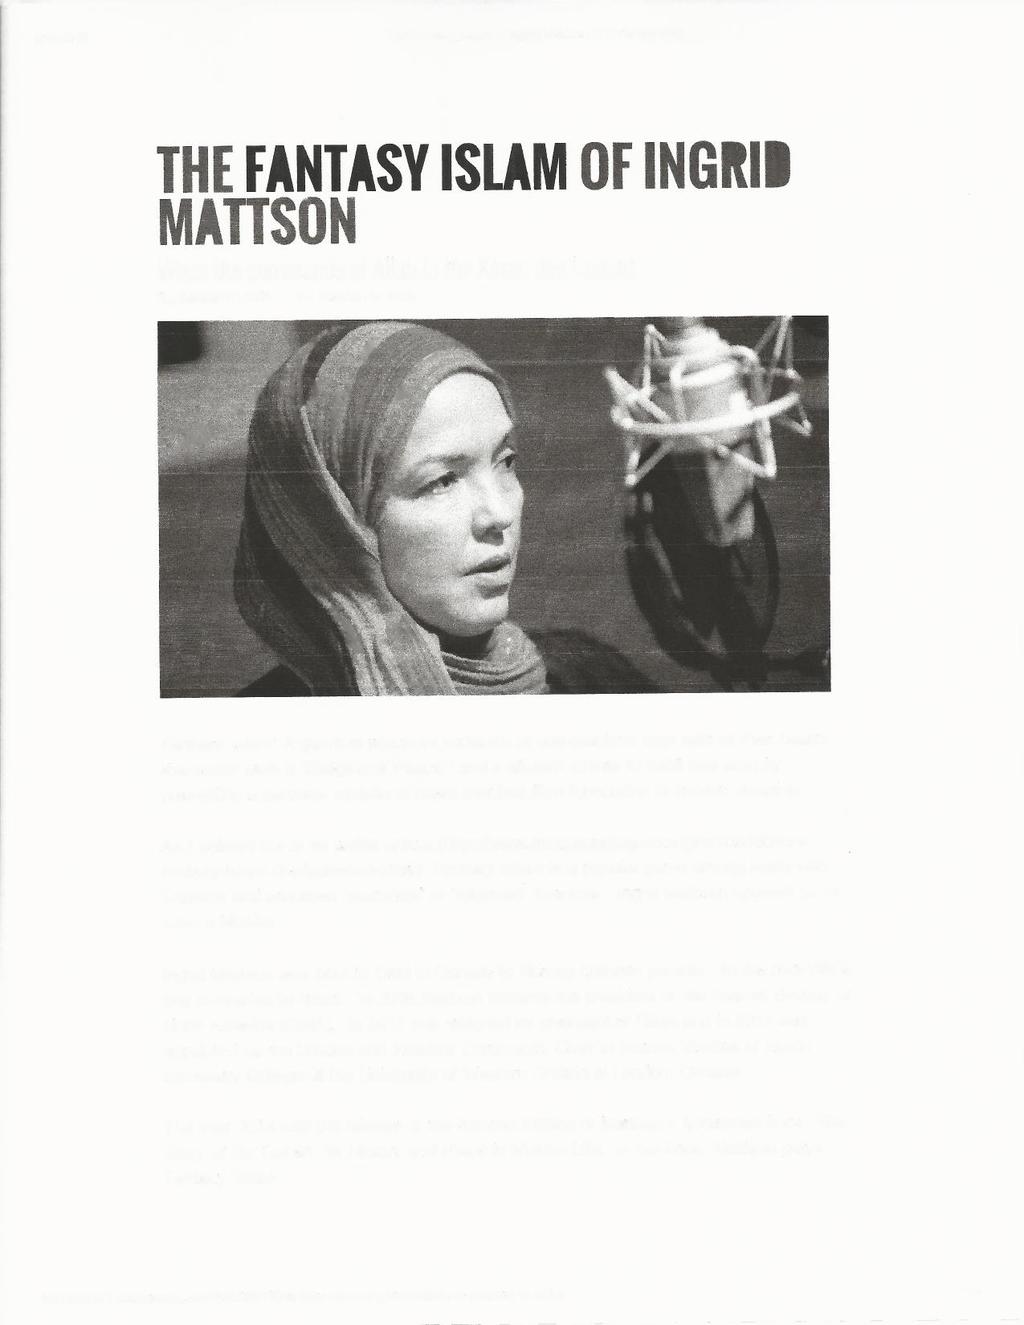 THE FANTASY ISLAM OF INGRID MATTSON When the commands of Allah in the Koran don't count. September 17, 2015 Dr. Stephen M.